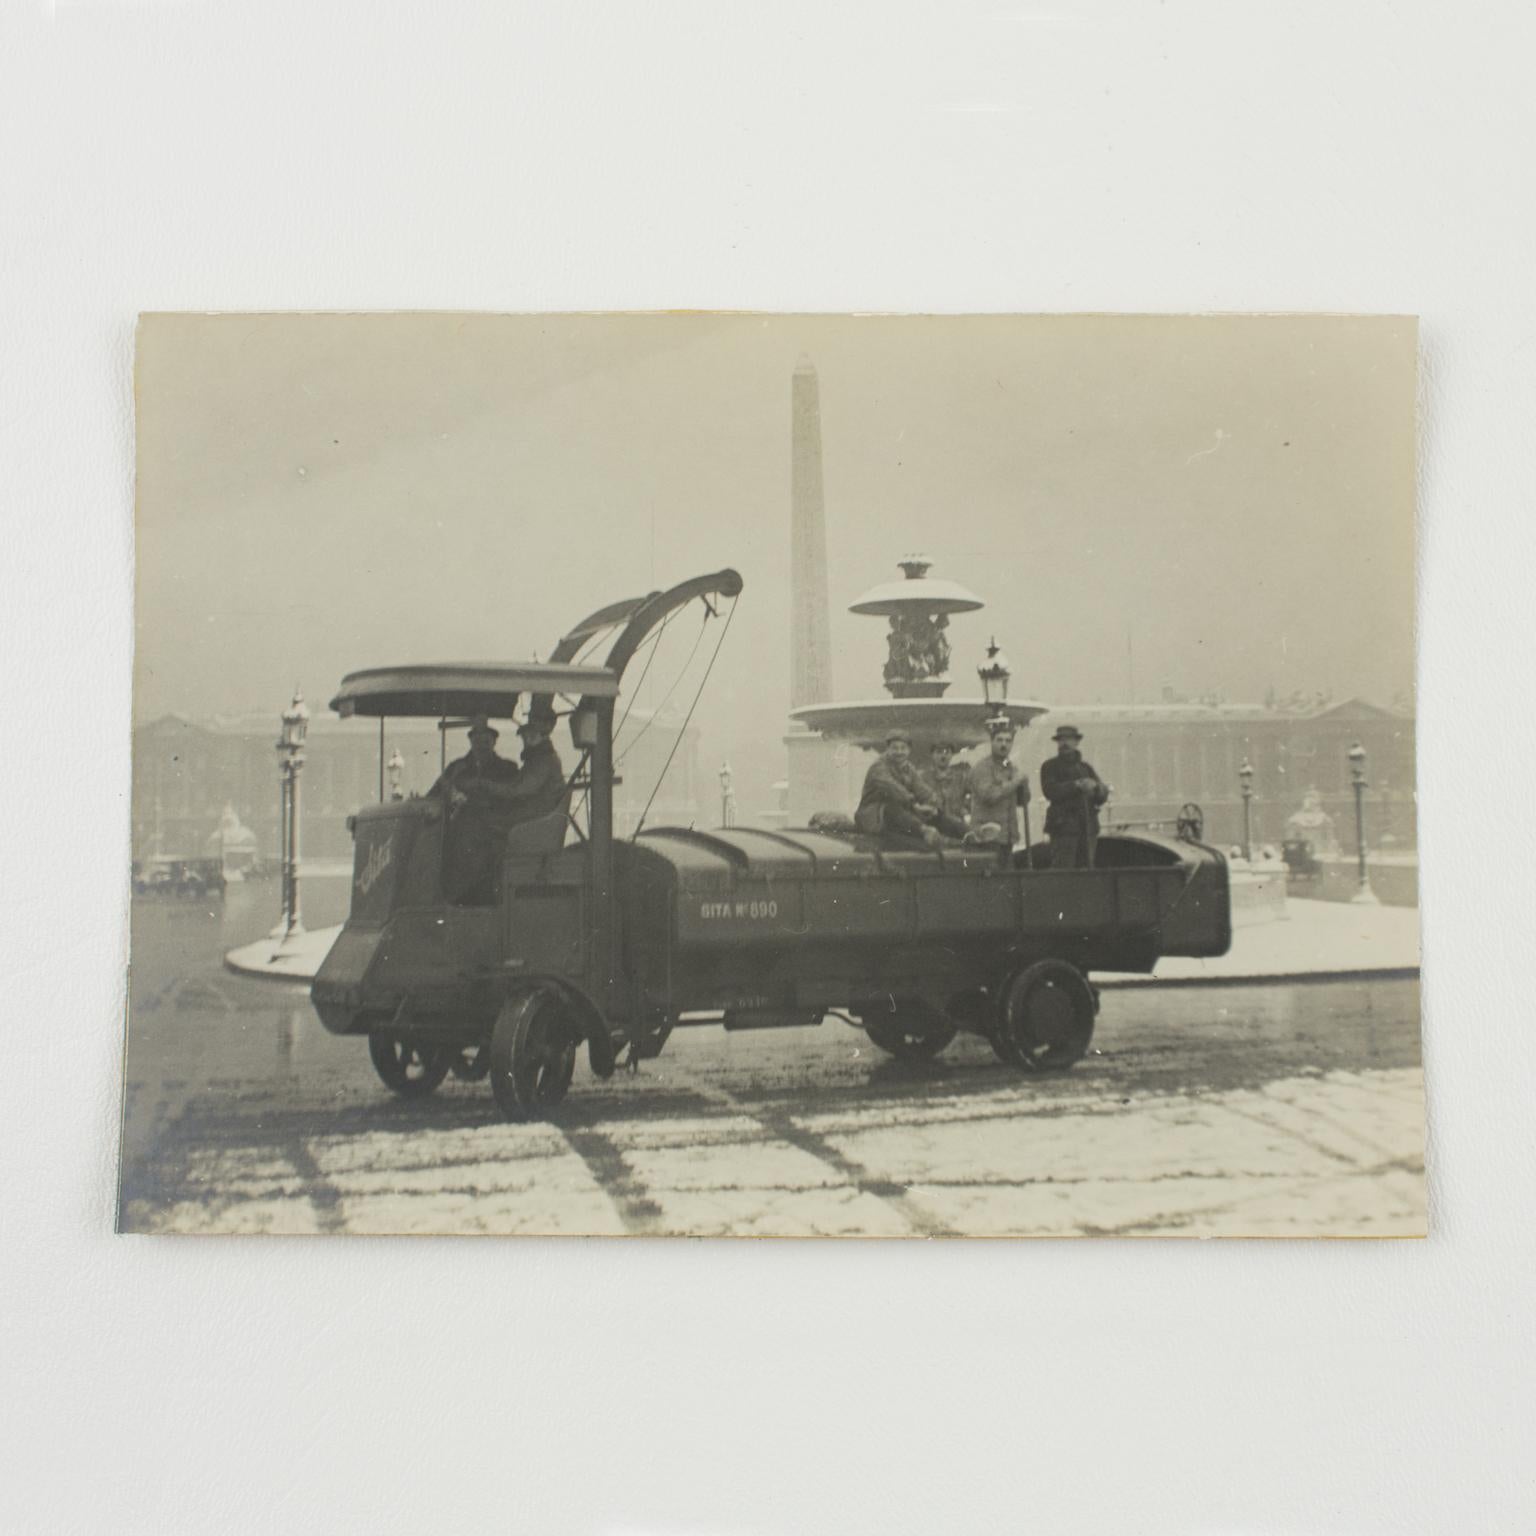 A unique original silver gelatin black and white photography. Paris, a salt truck on Place de la Concorde under the snow, January 16th, 1926.
The employees of the mayor of Paris spread salt on the Parisian road covered by a thick layer of